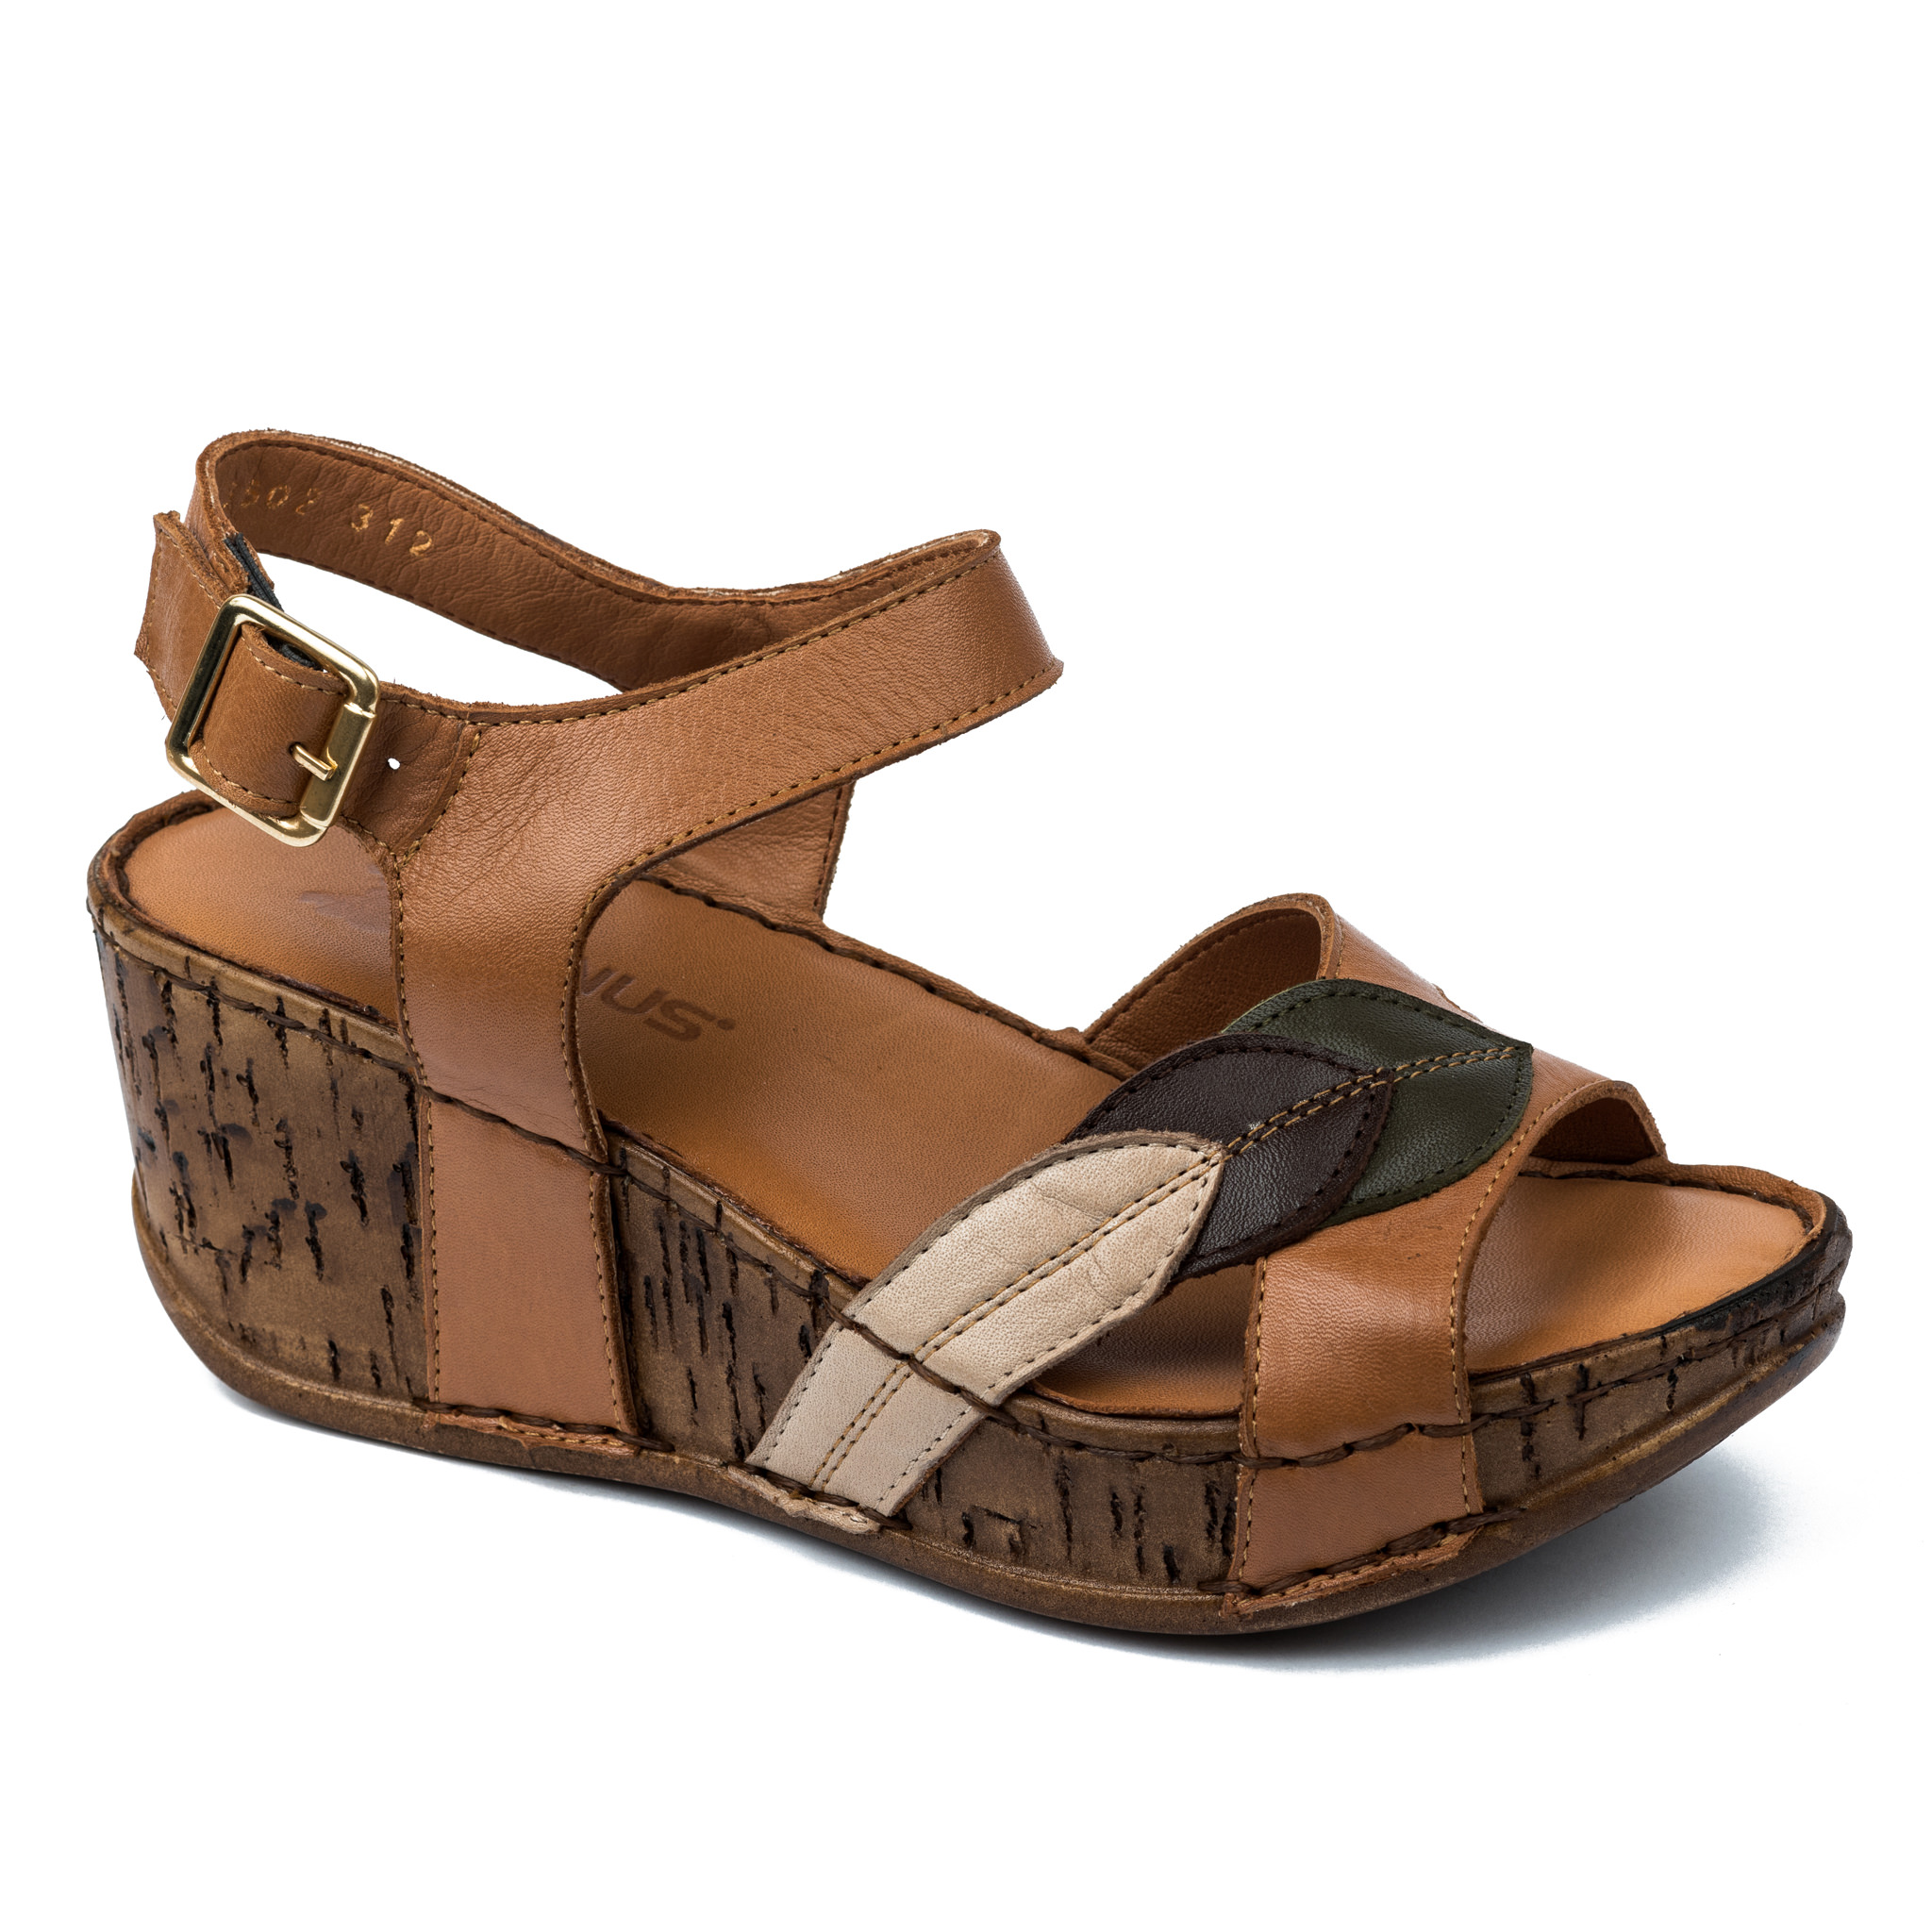 Leather sandals A232 - CAMEL